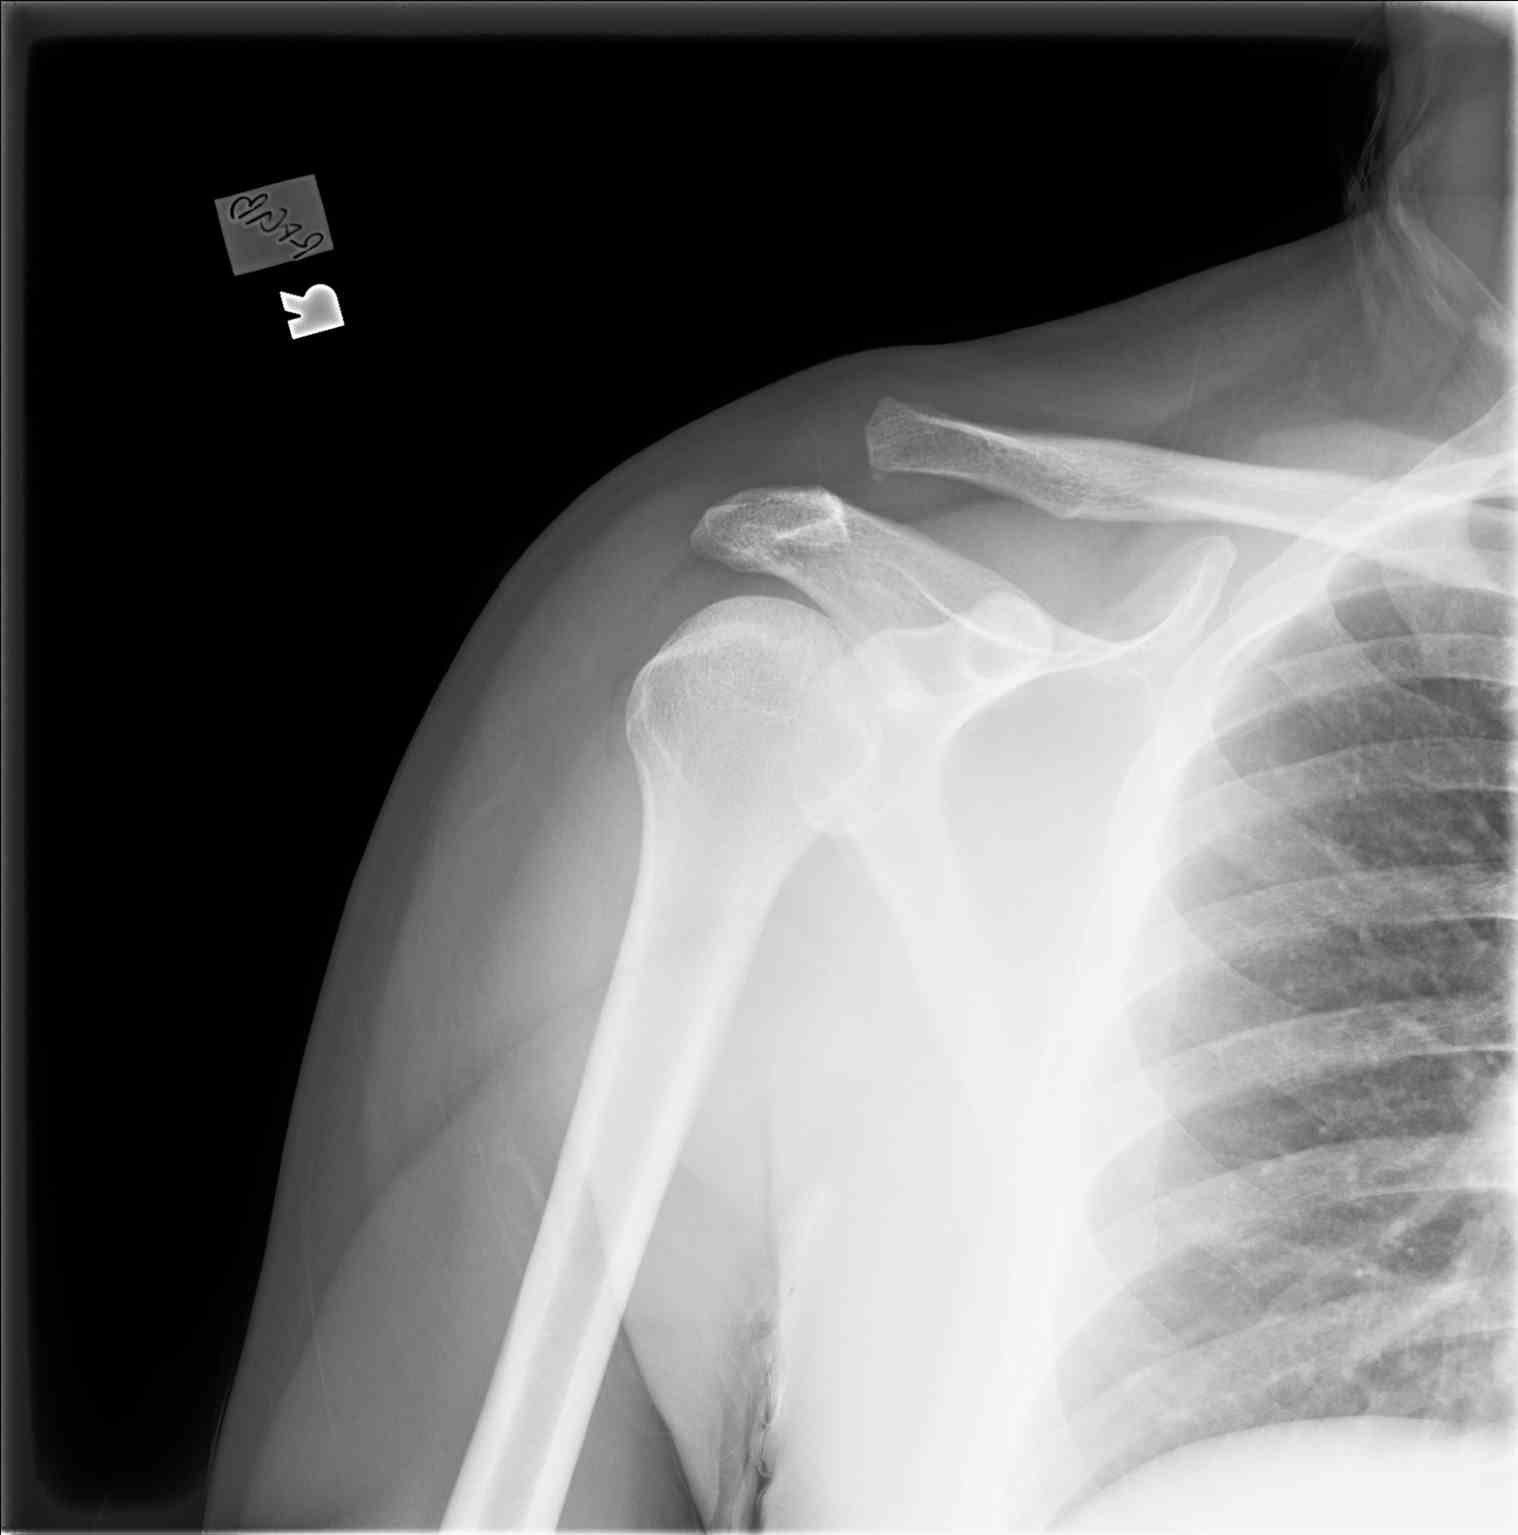 <p>Shoulder Radiograph,&nbsp;Acromioclavicular (AC) Joint Separation With Injury Type III/IV</p>